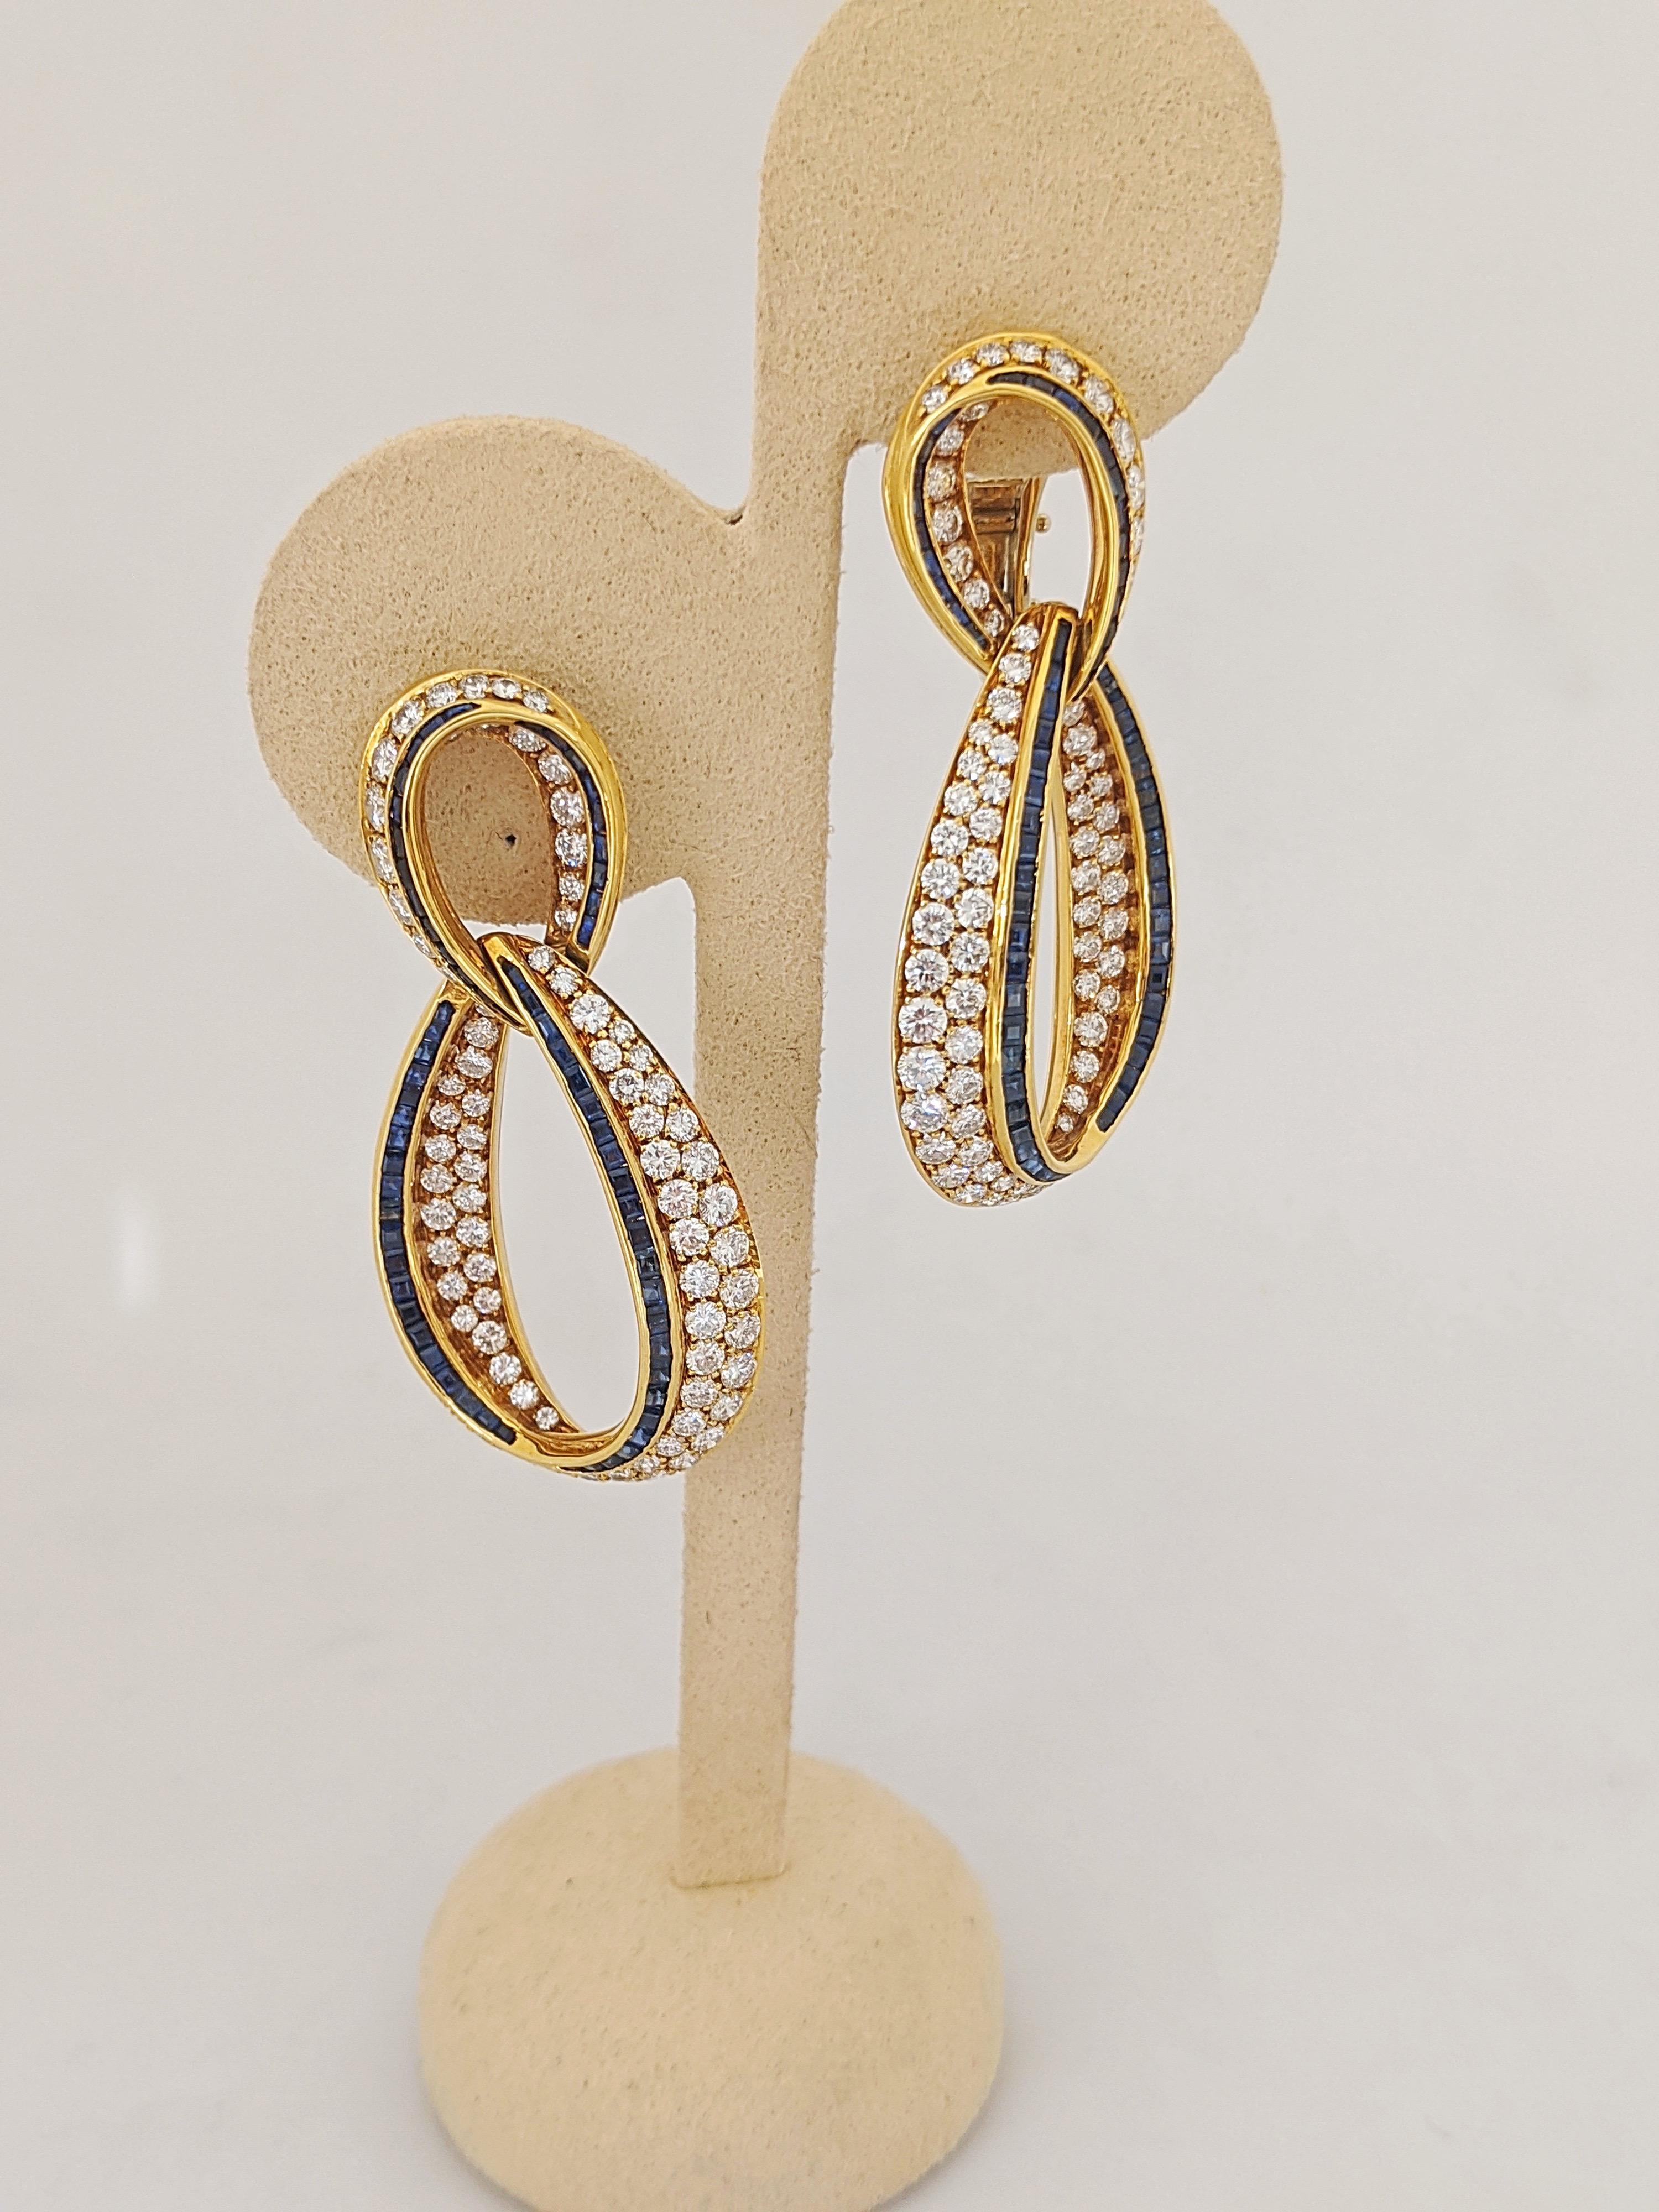 A lovely pair of 18 karat yellow gold earrings set with round brilliant cut Diamonds and Blue Sapphires. The earrings are formed with two interlocking teardrop shapes. The pave setting of the stones is done so beautifully , highlighting the inside